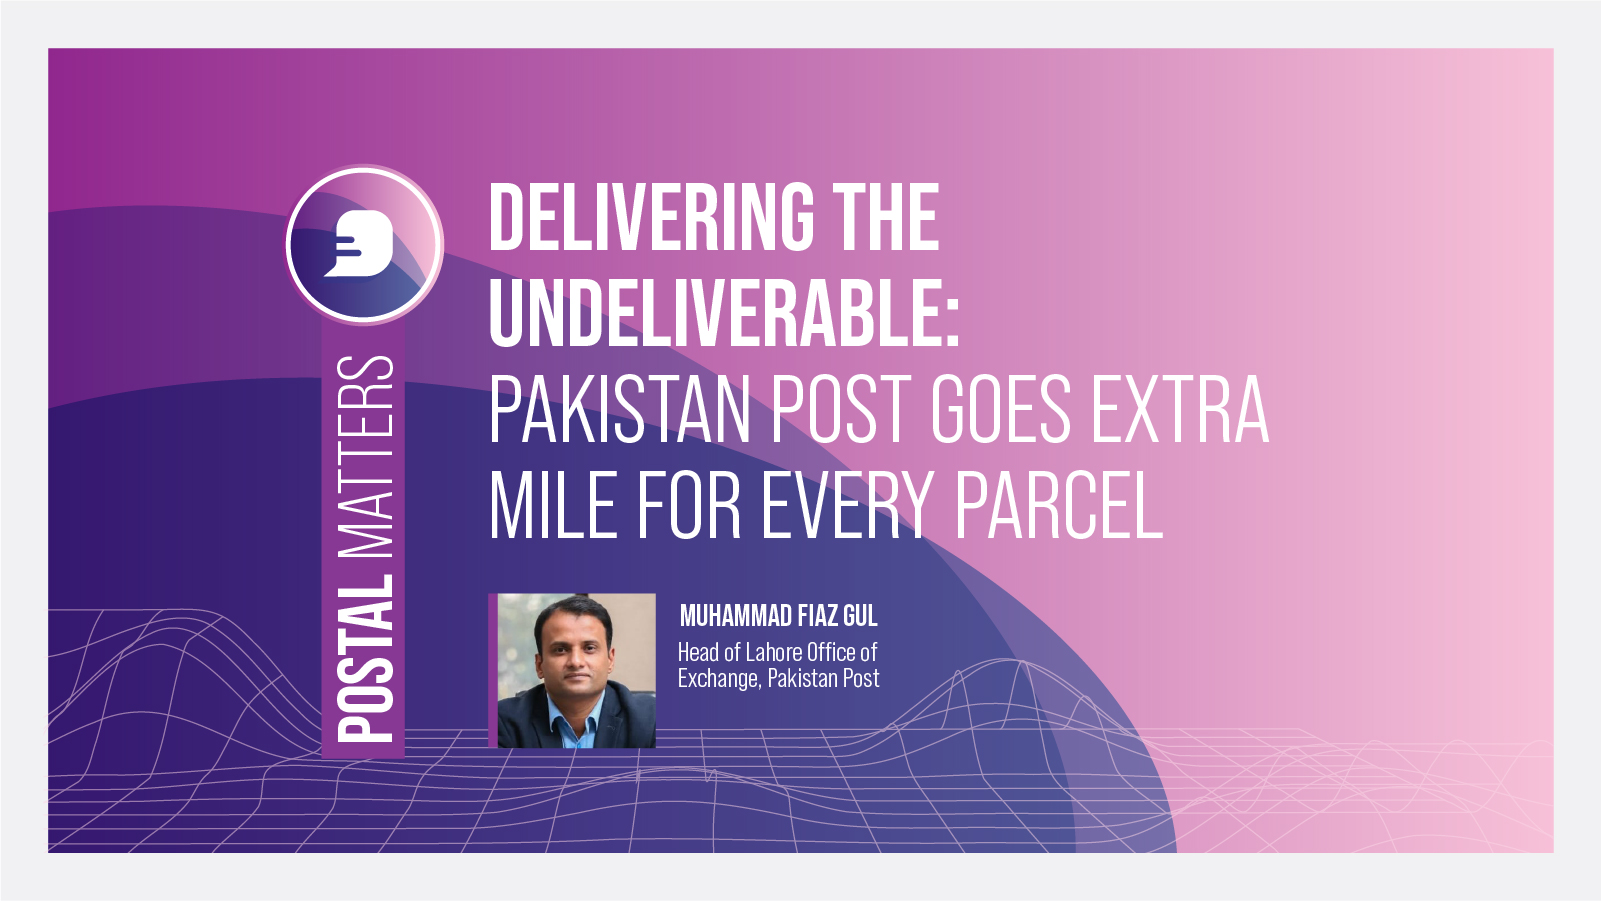 Delivering the undeliverable: Pakistan Post goes extra mile for every parcel